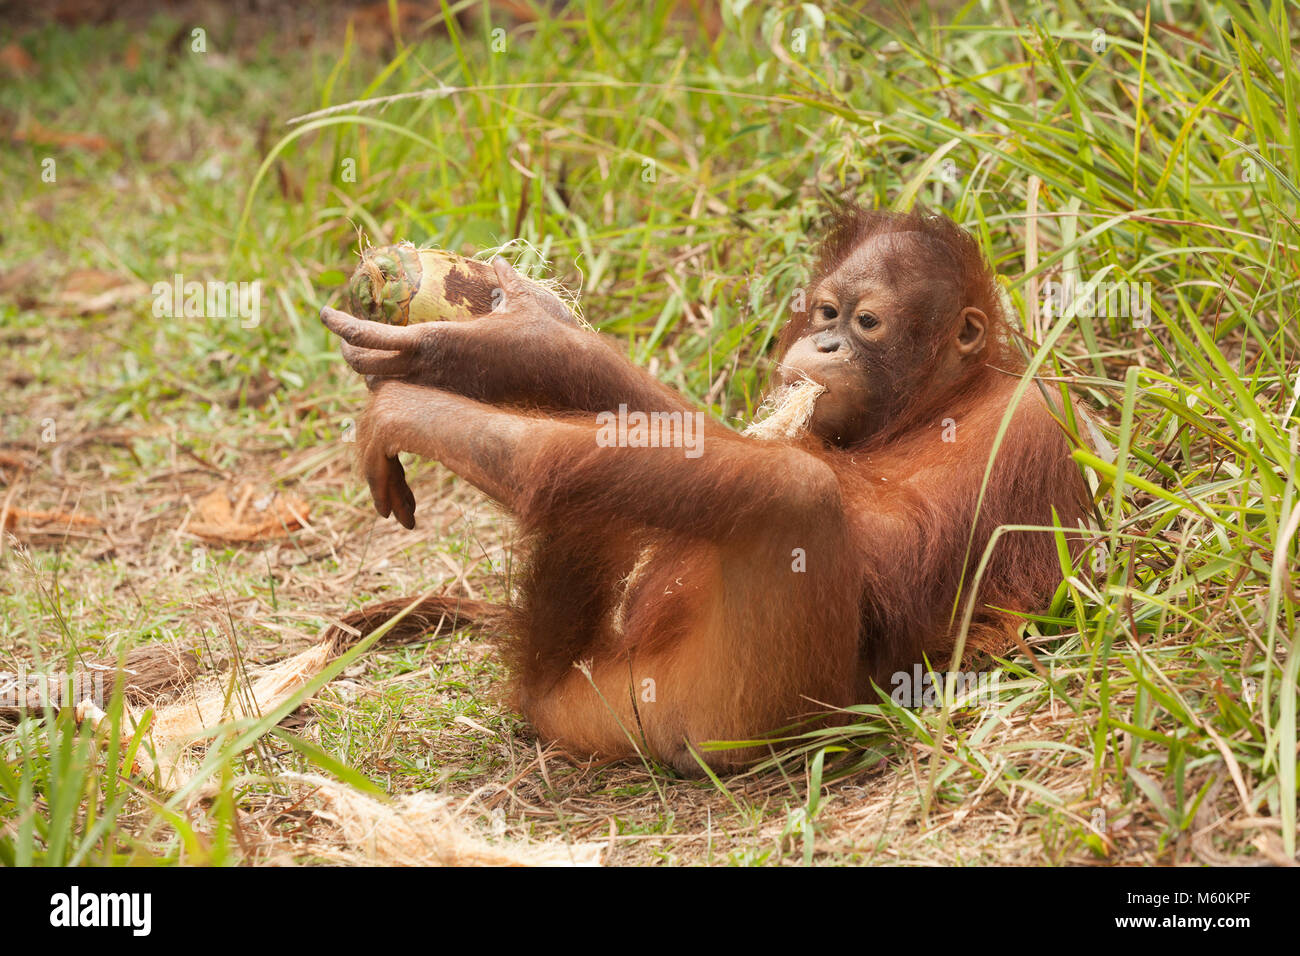 Young orphan orangutan playing with coconut in outdoor exploration session at the Orangutan Care Center (Pongo pygmaeus) Stock Photo